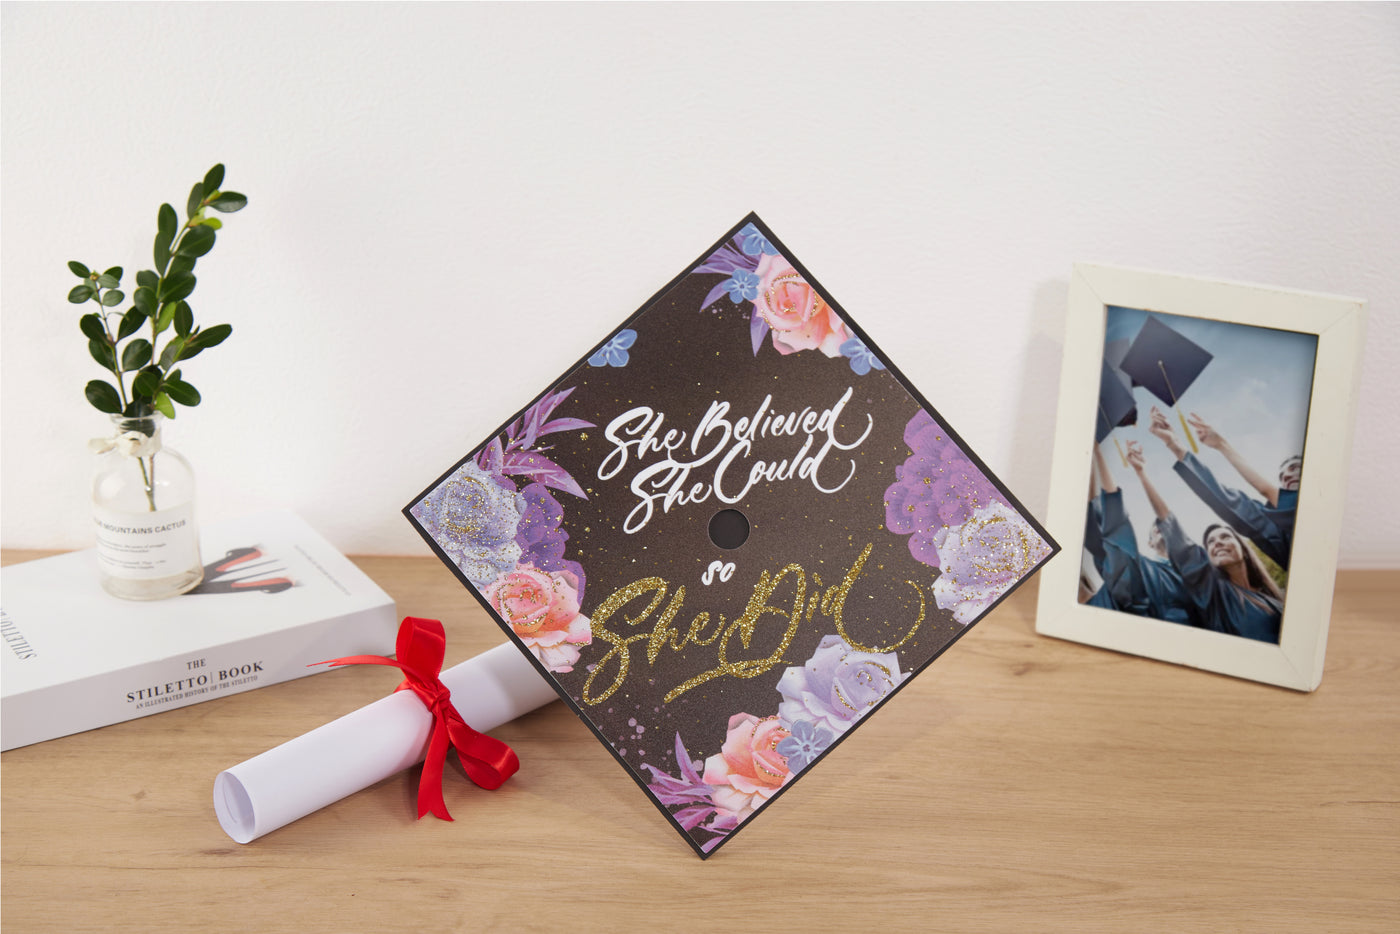 Graduation cap topper art print, She believed she could so she did